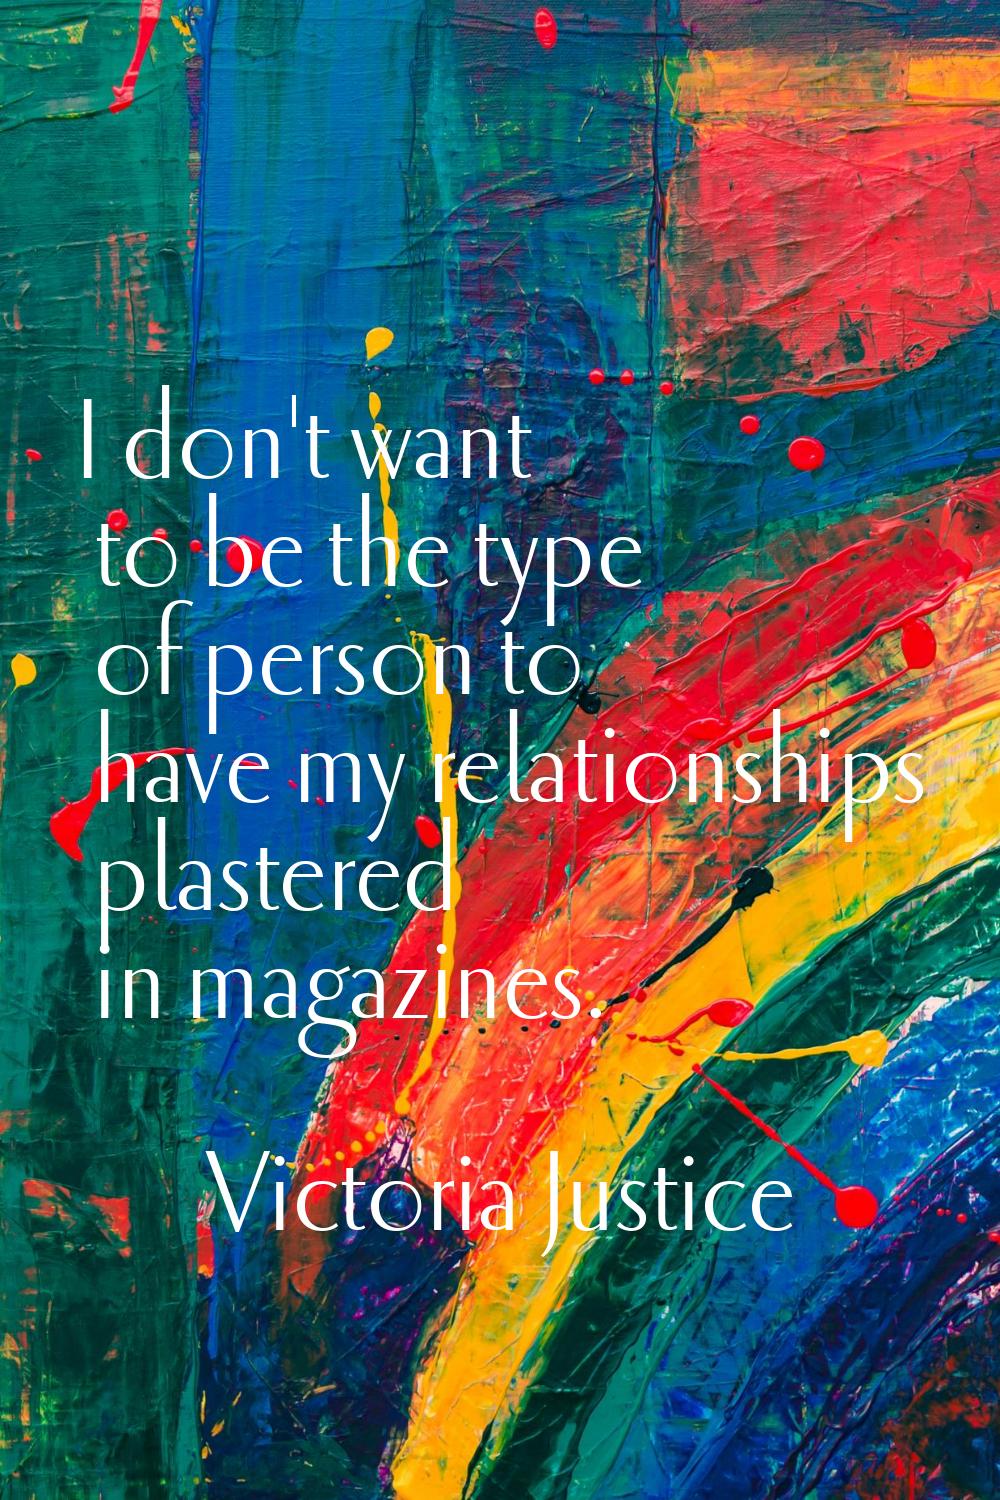 I don't want to be the type of person to have my relationships plastered in magazines.